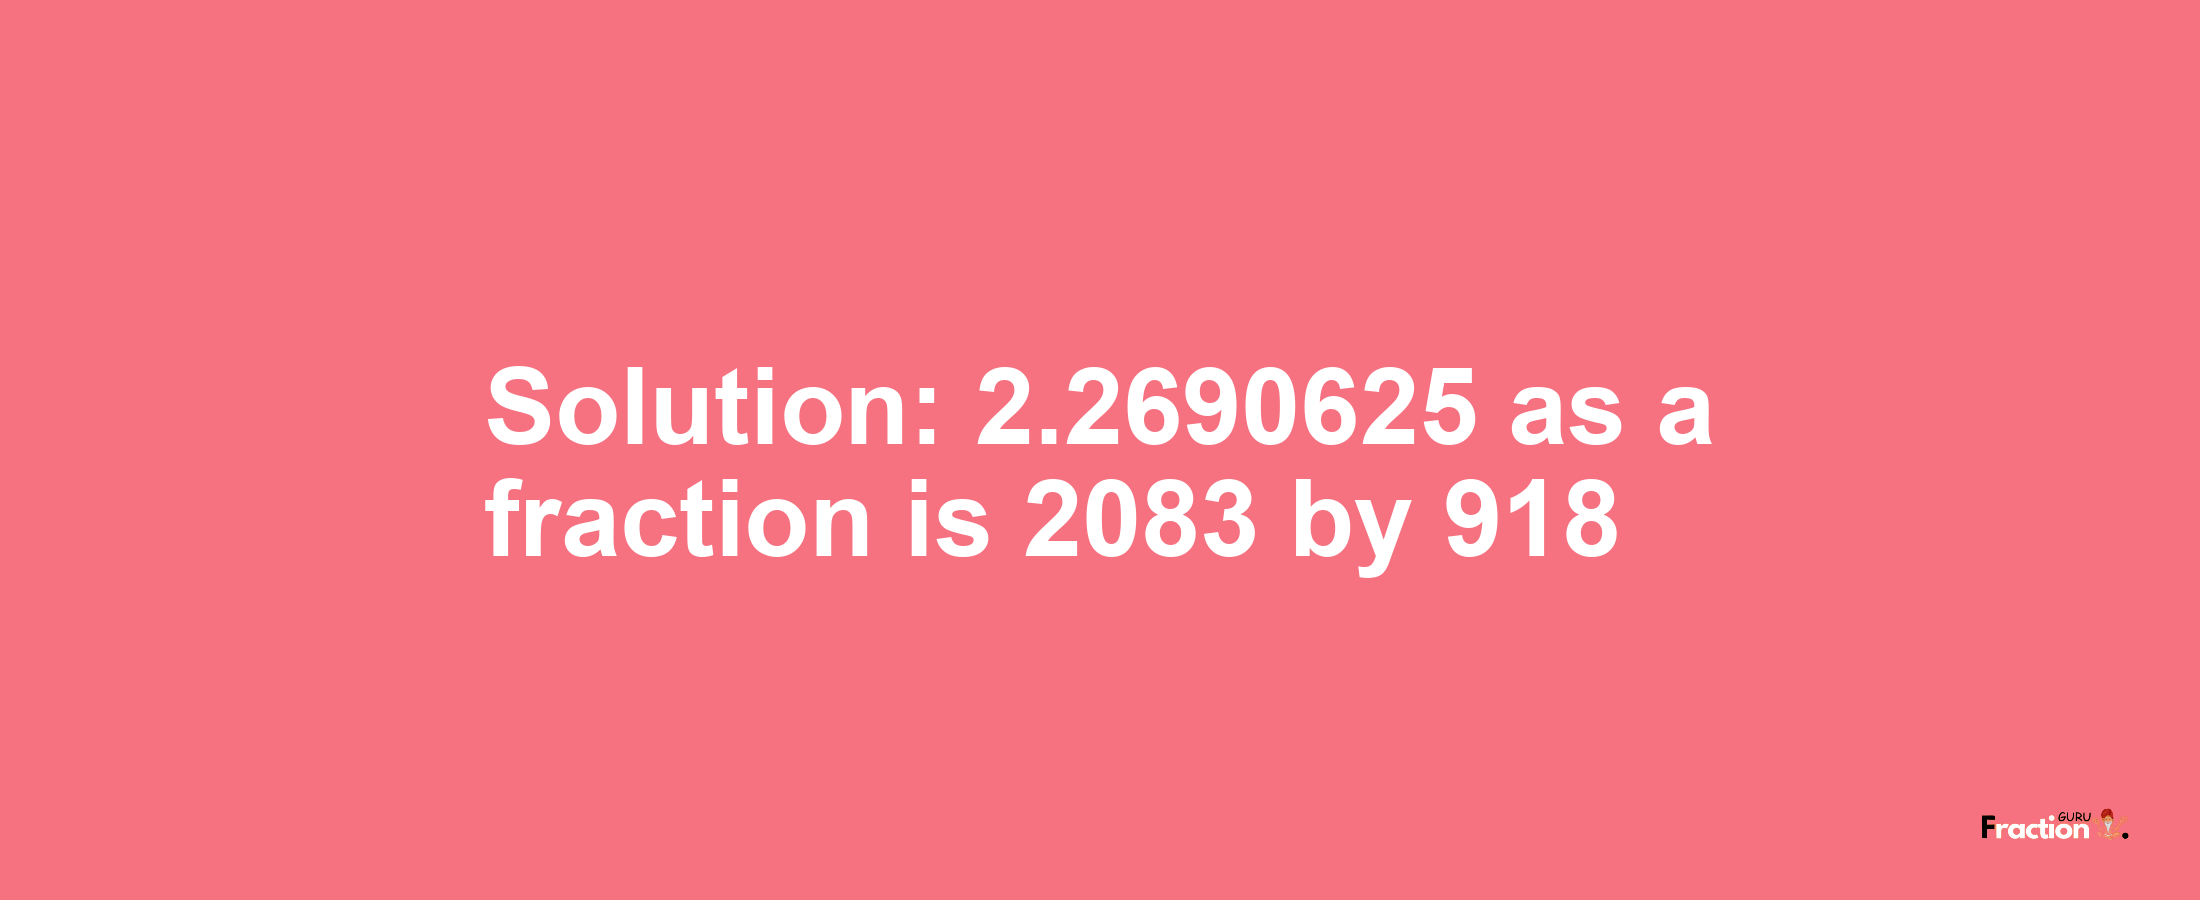 Solution:2.2690625 as a fraction is 2083/918